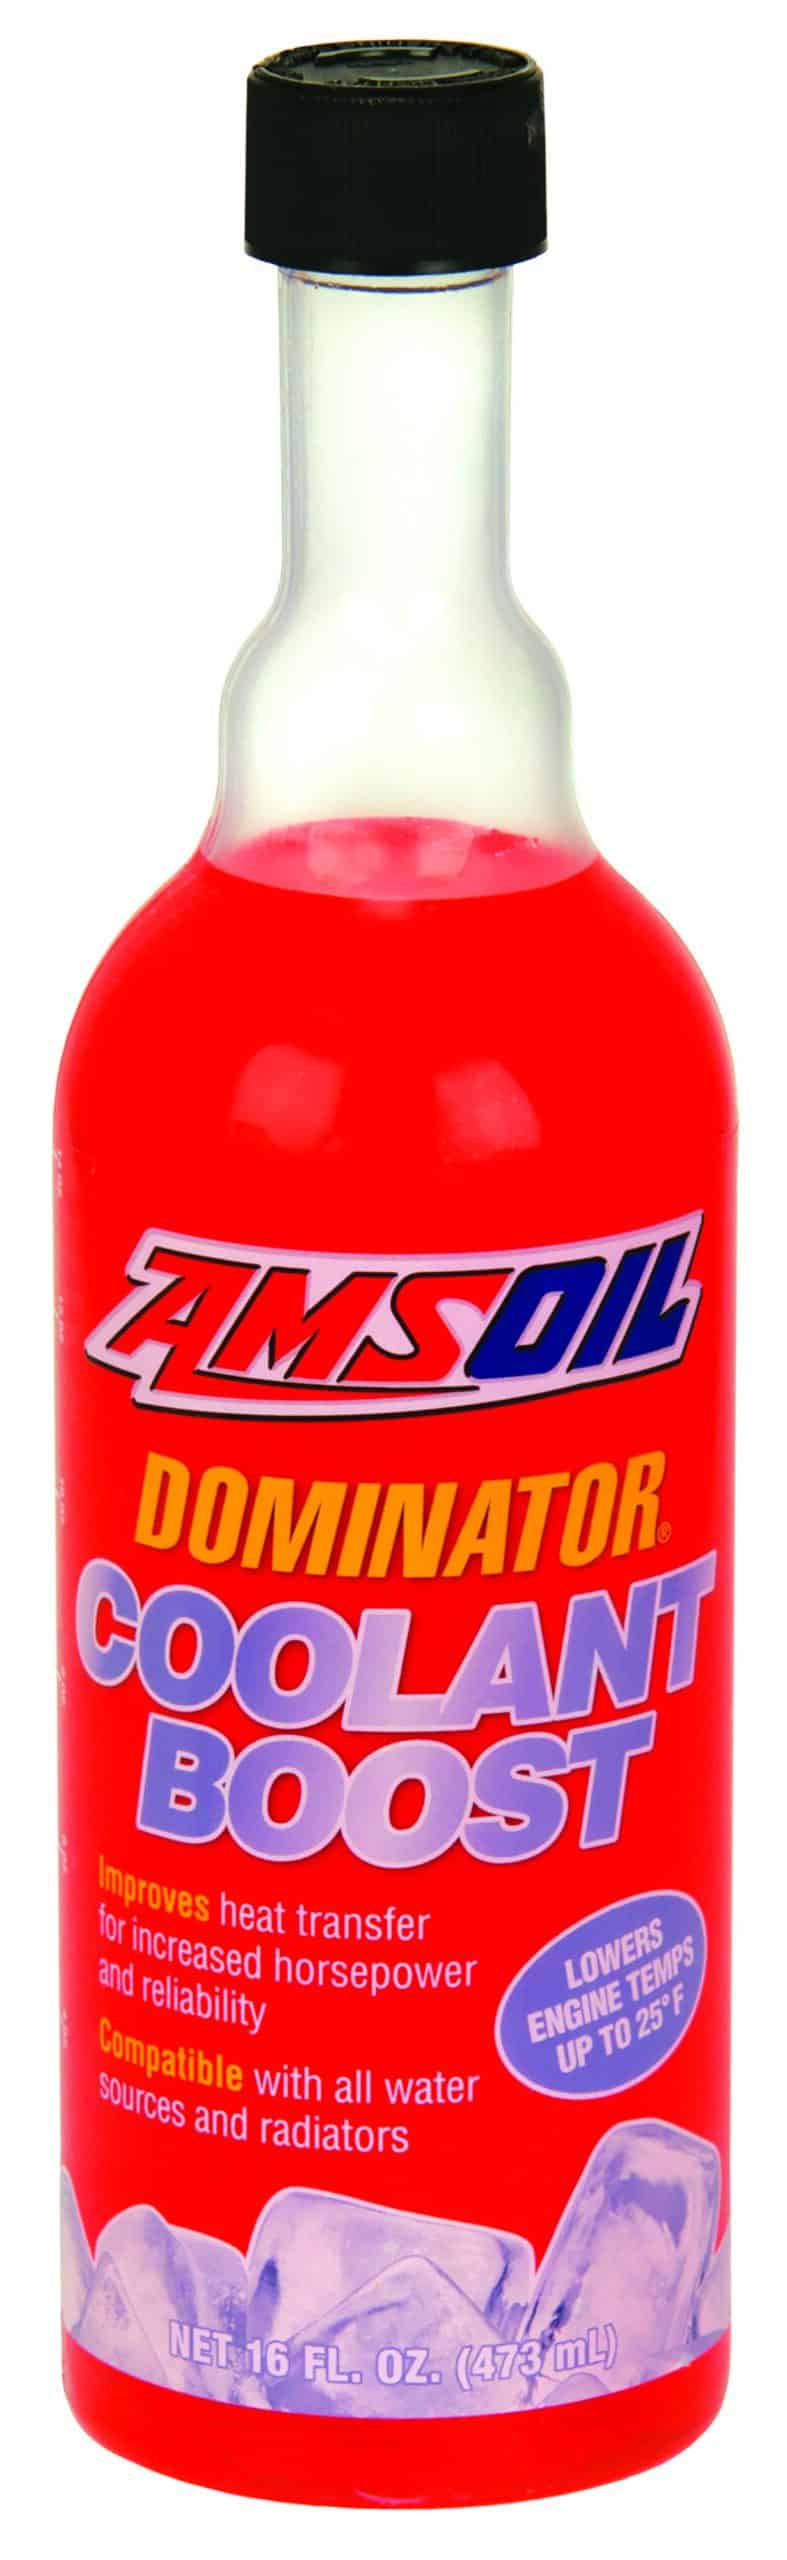 A bottle of AMSOIL DOMINATOR® Coolant Boost. It provides racers, motorists lower engine operating temperatures, Faster Vehicle Warmup times, advanced corrosion protection.